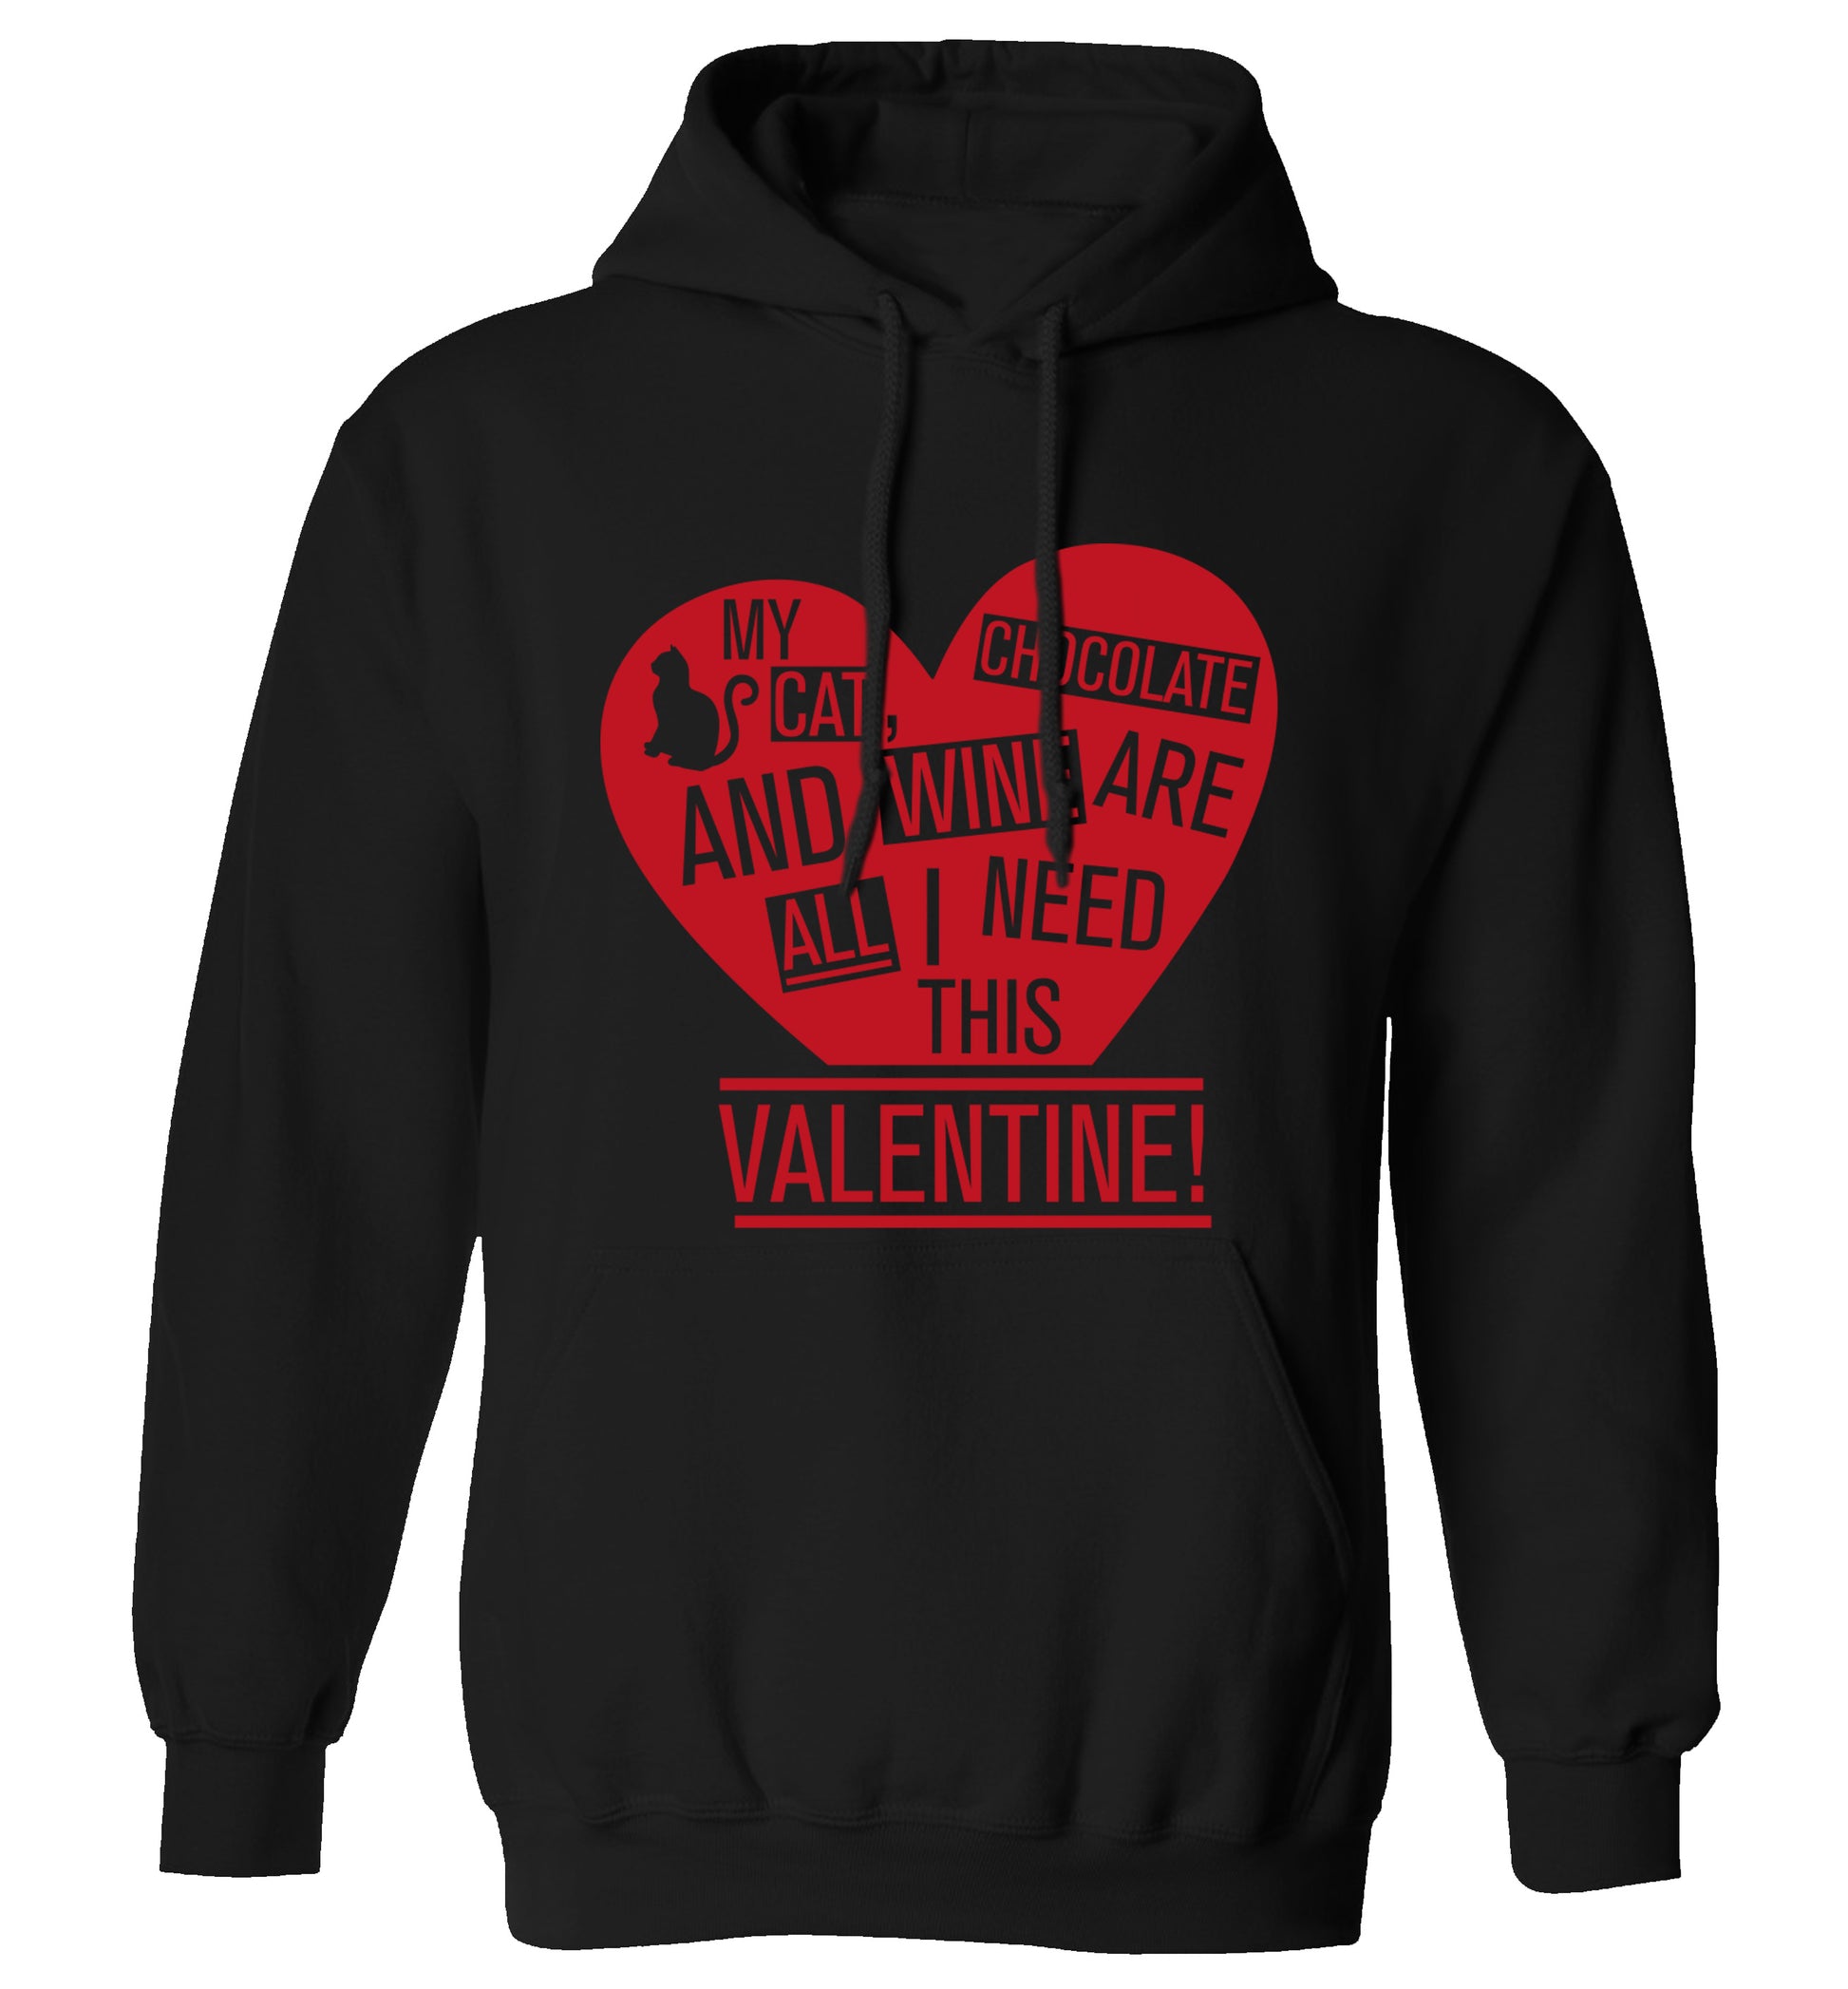 My cat, chocolate and wine are all I need this valentine! adults unisex black hoodie 2XL